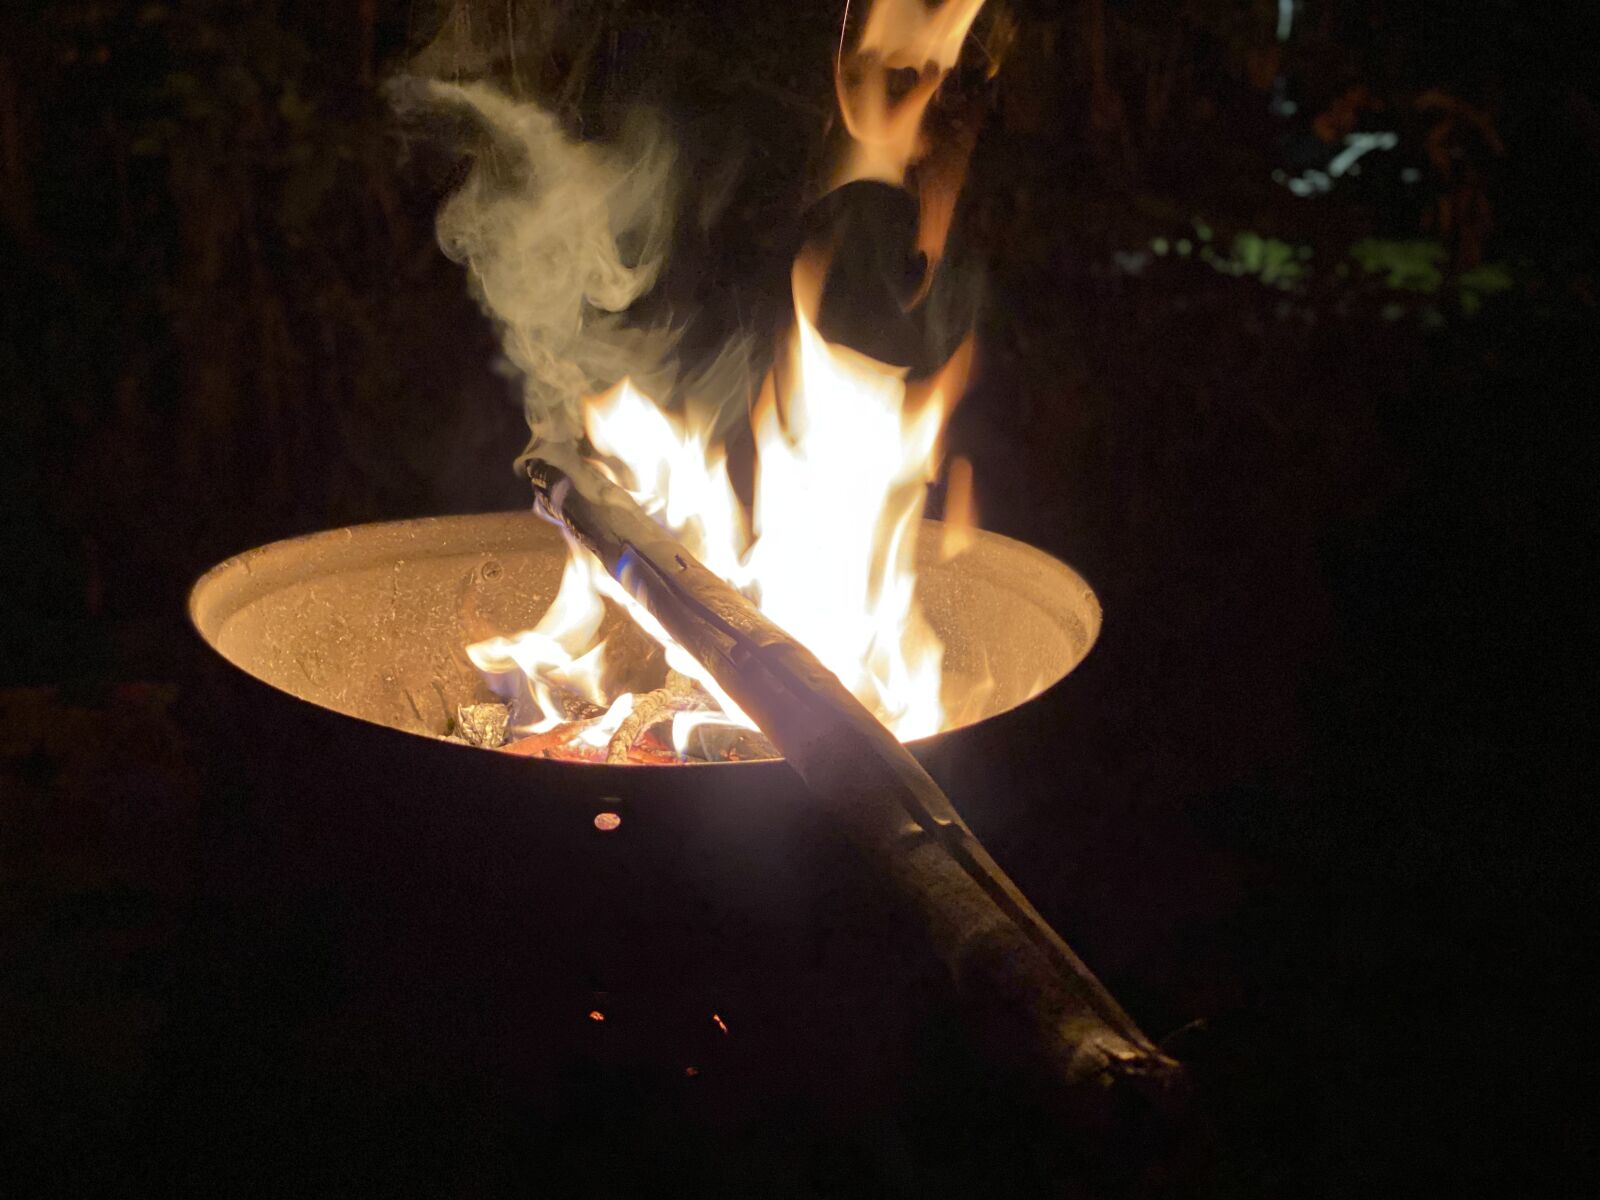 Apple iPhone 11 Pro Max + iPhone 11 Pro Max back dual camera 6mm f/2 sample photo. Camping, fire, campfire photography